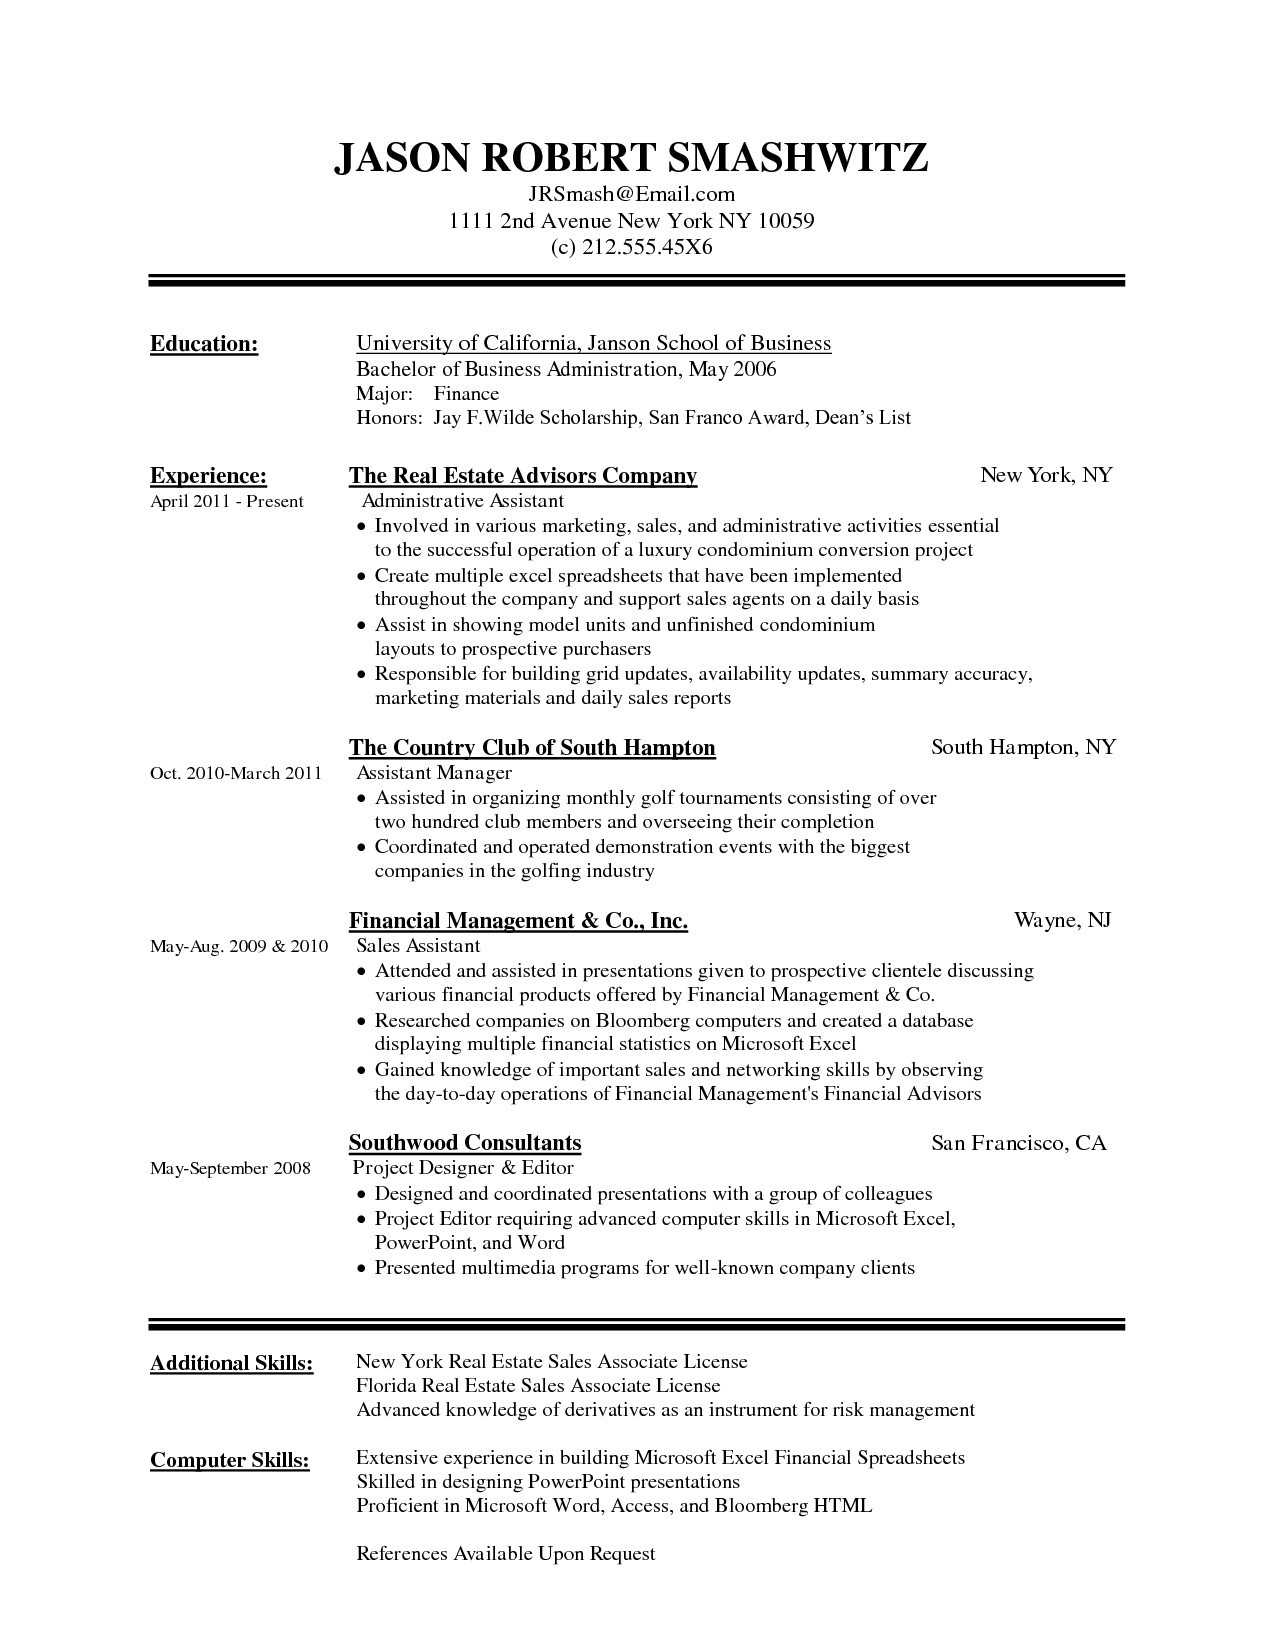 Awesome Resume Templates For Word 2010 – Superkepo Inside Resume Templates Word 2010